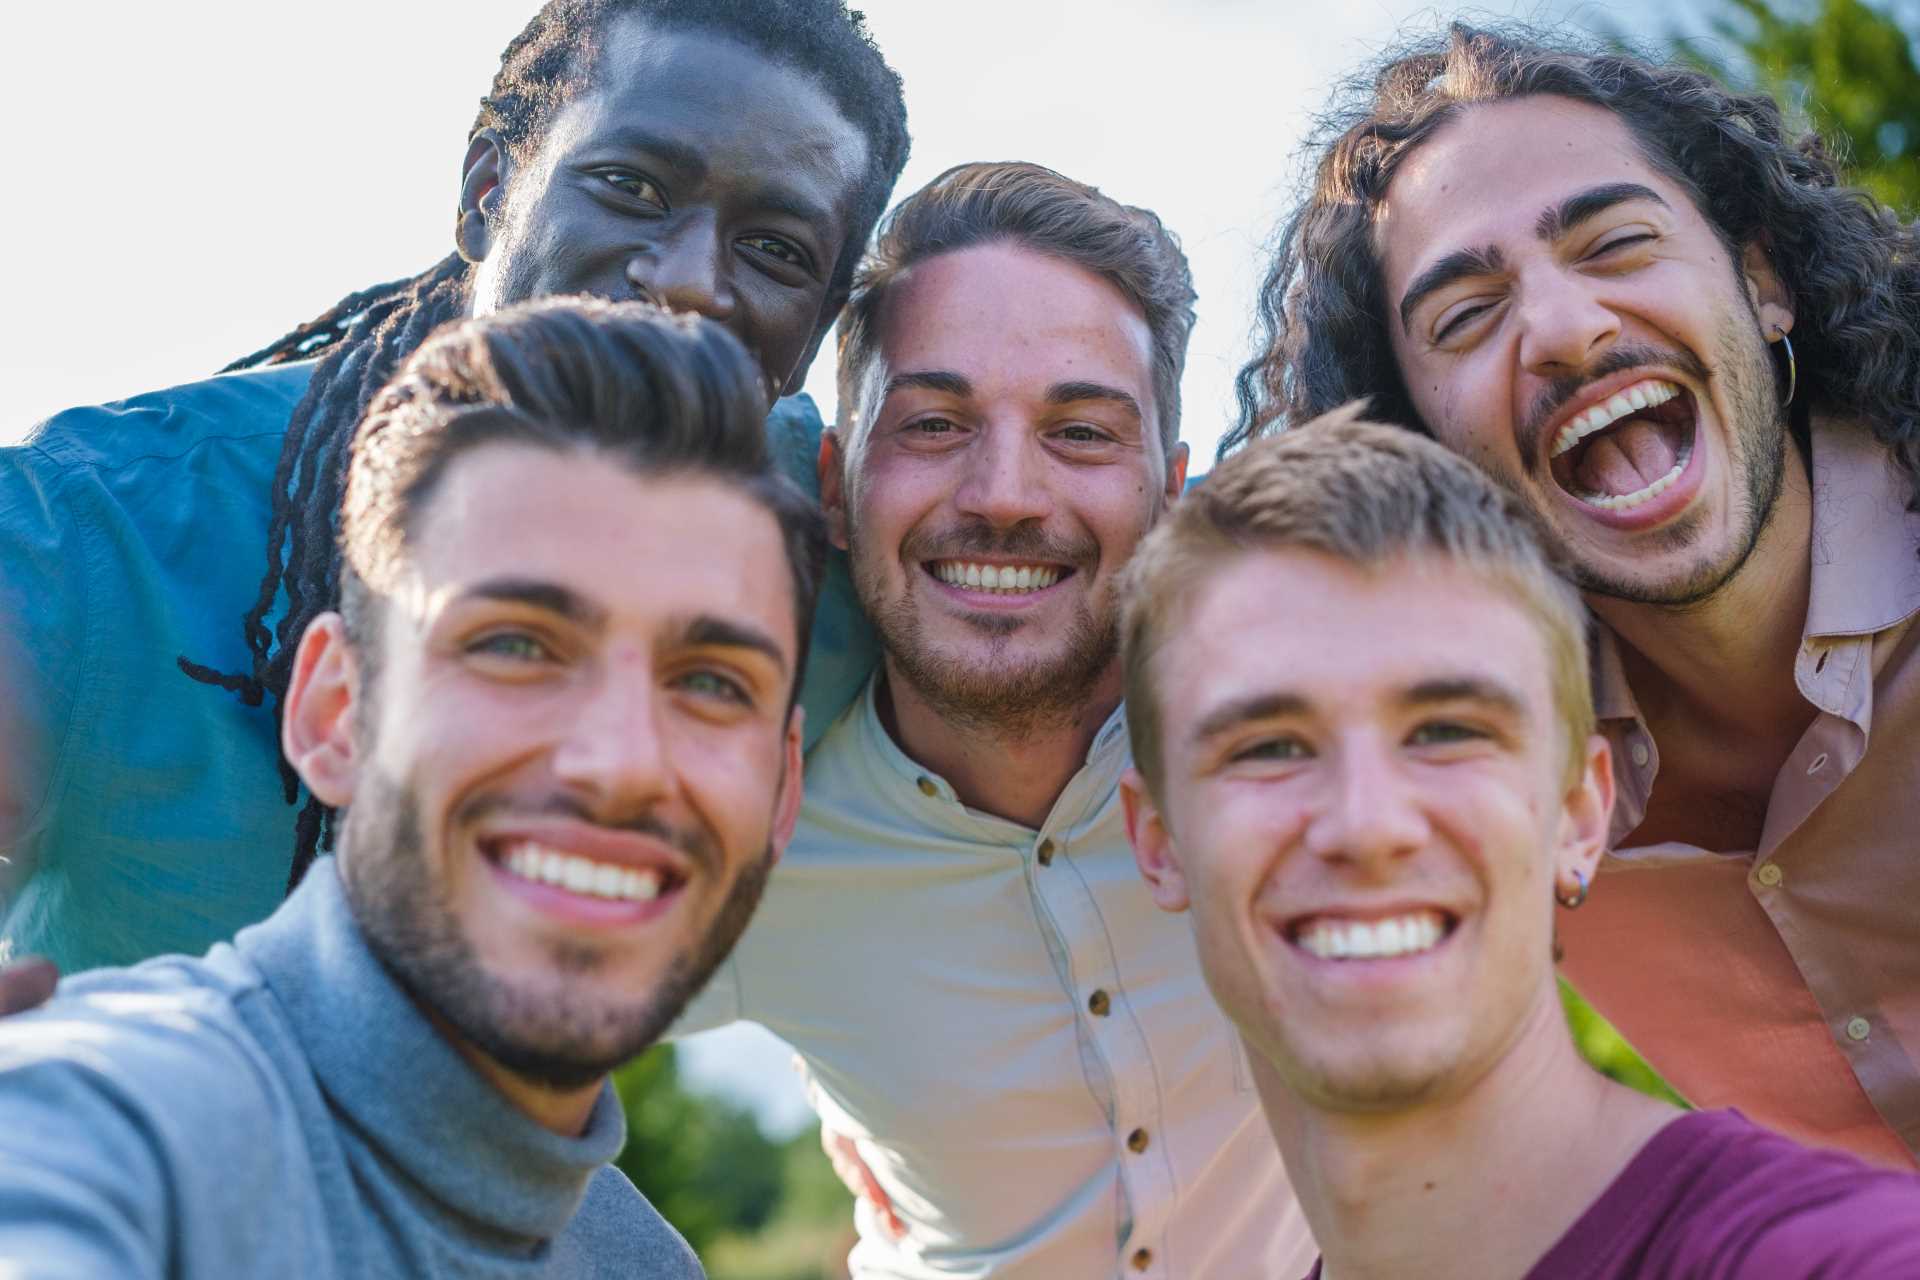 Group of men smiling at the camera | Featured image for the Men's Oral Health blog by Pearl Denture Studio.